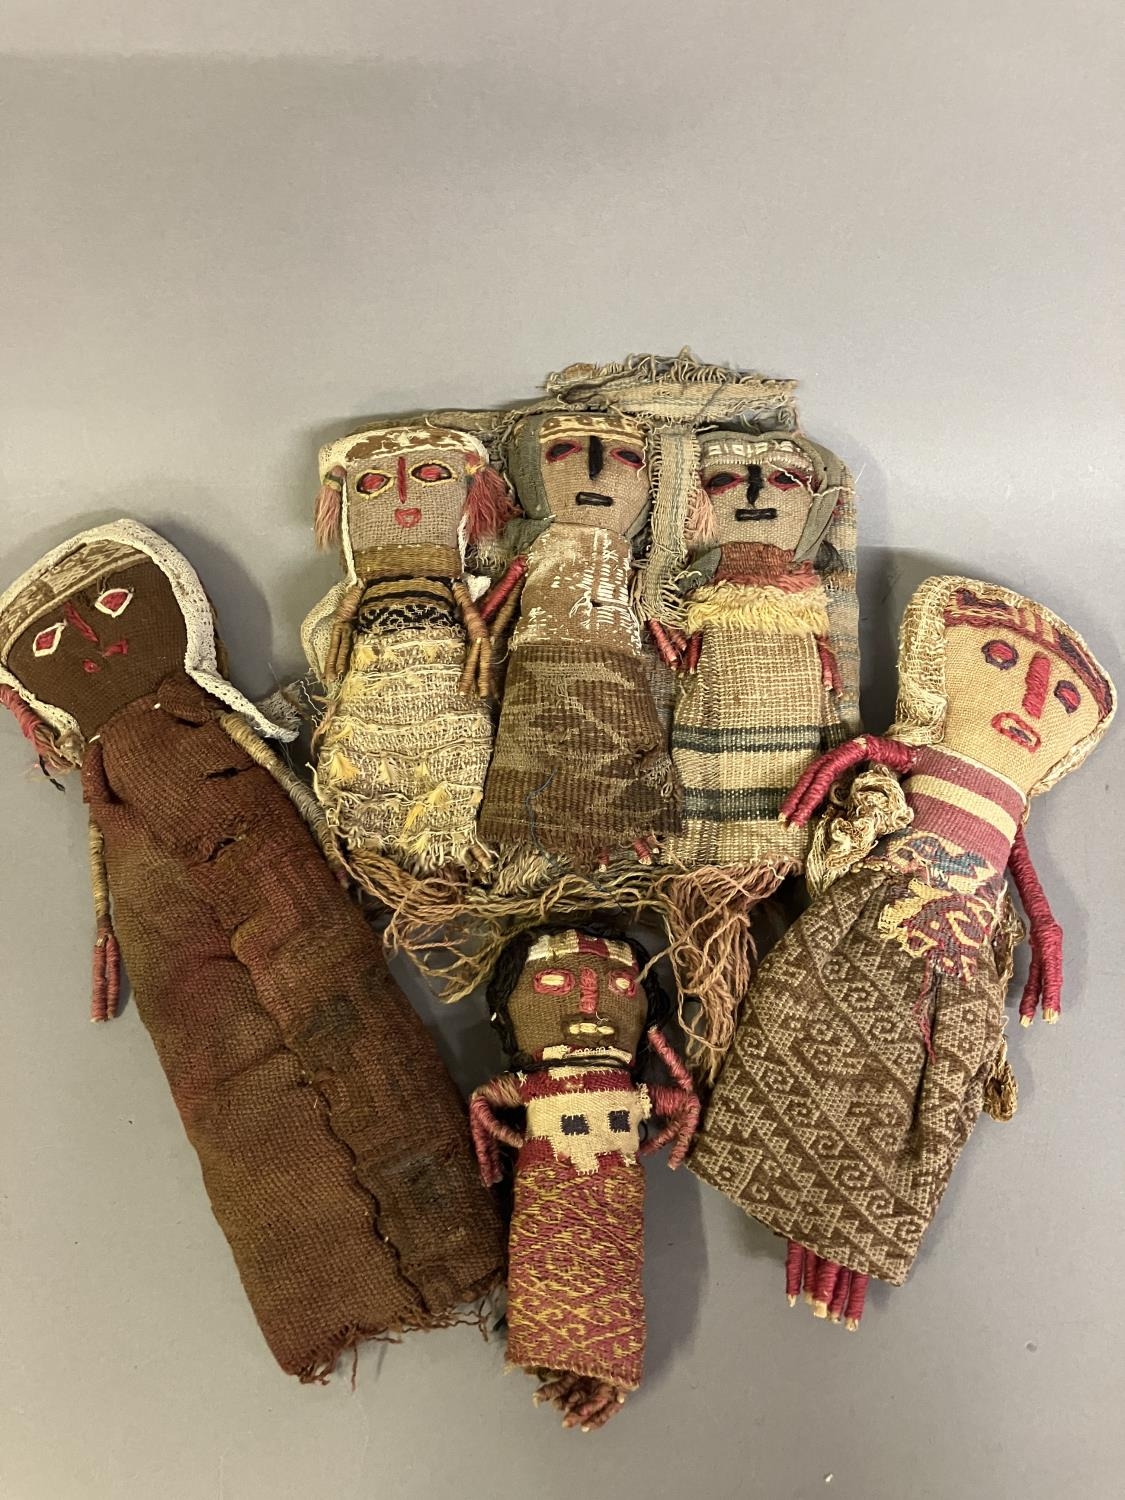 Antique Chancay Peruvian Burial Dolls, coastal central Peru, six in all, being what appears to be